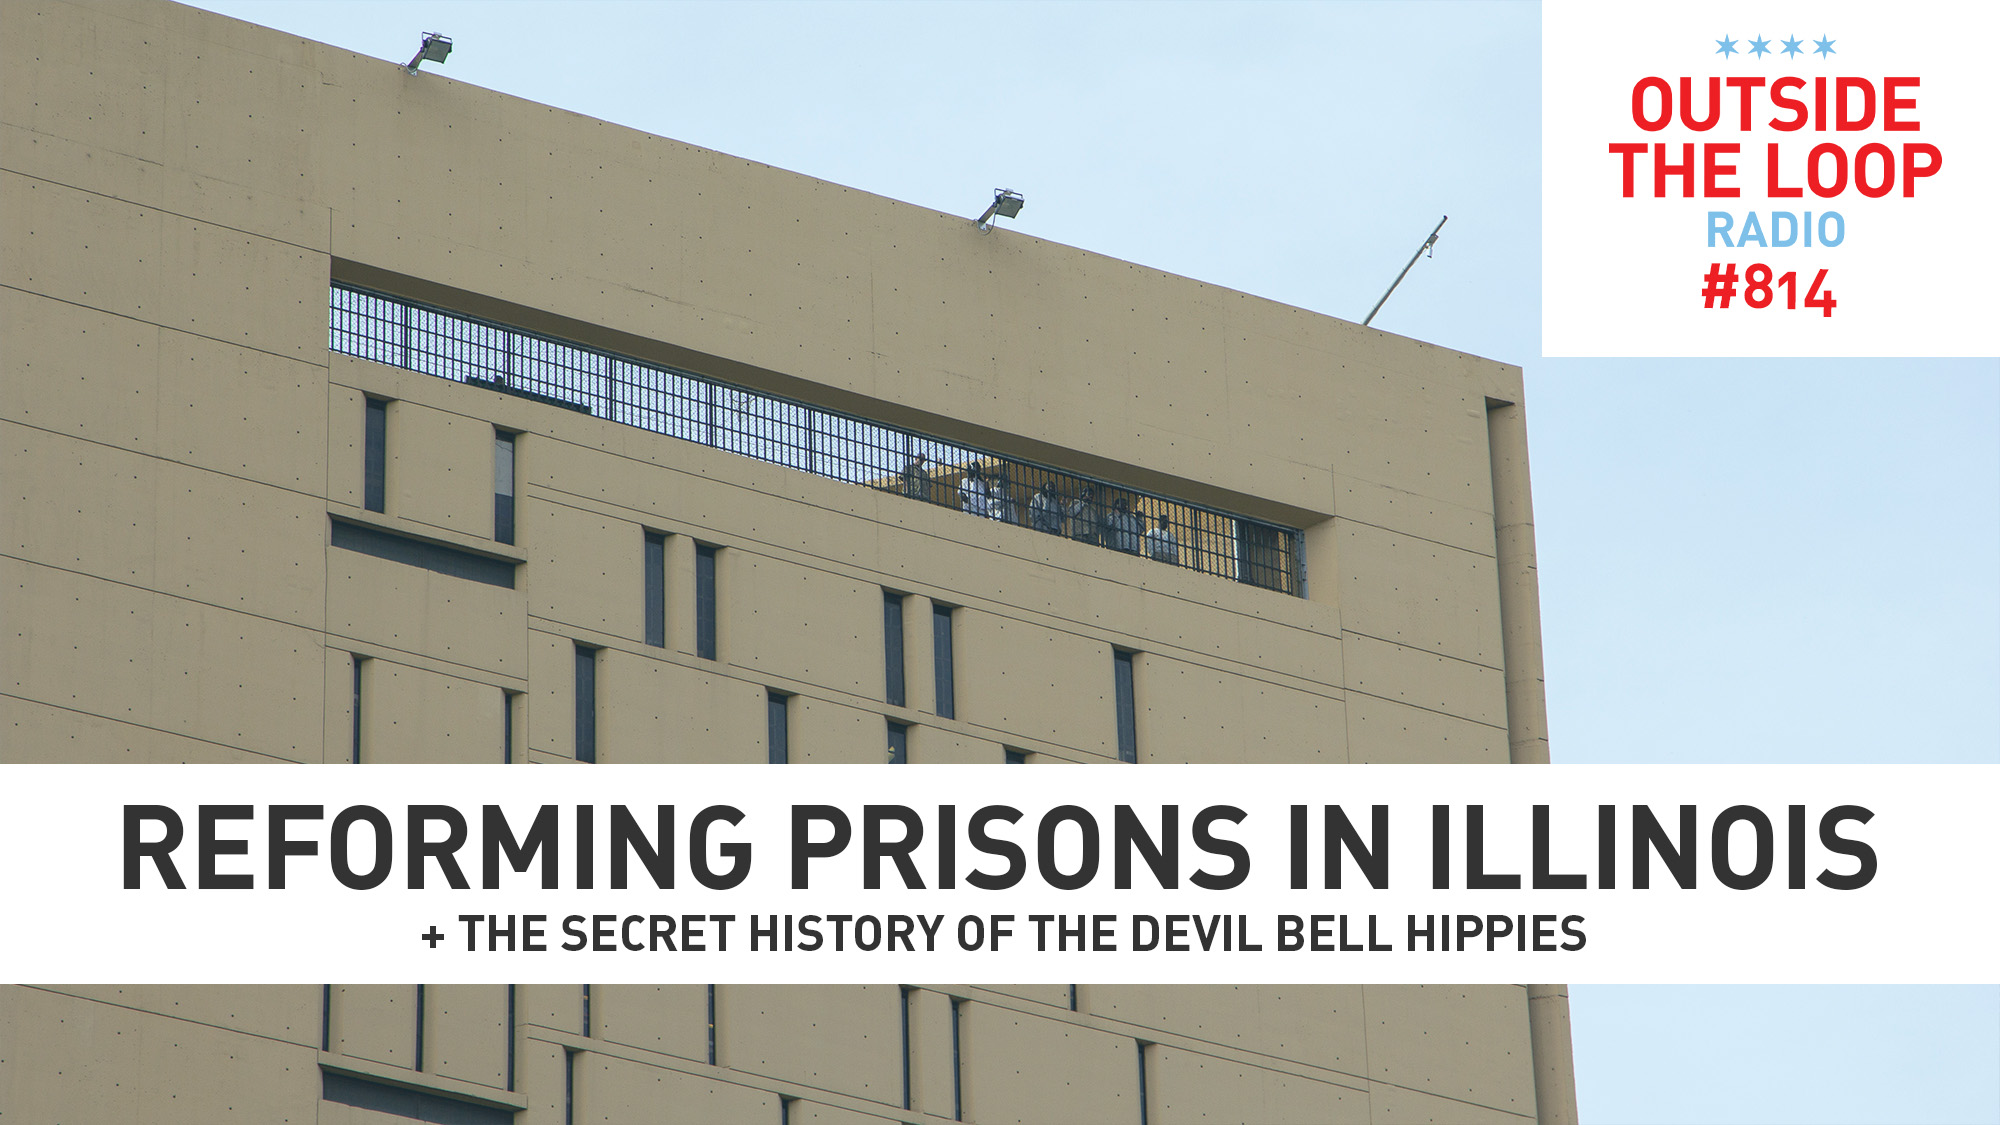 There is a plan to reform prisons in Illinois. (Photo credit: Mike Stephen/WGN Radio)